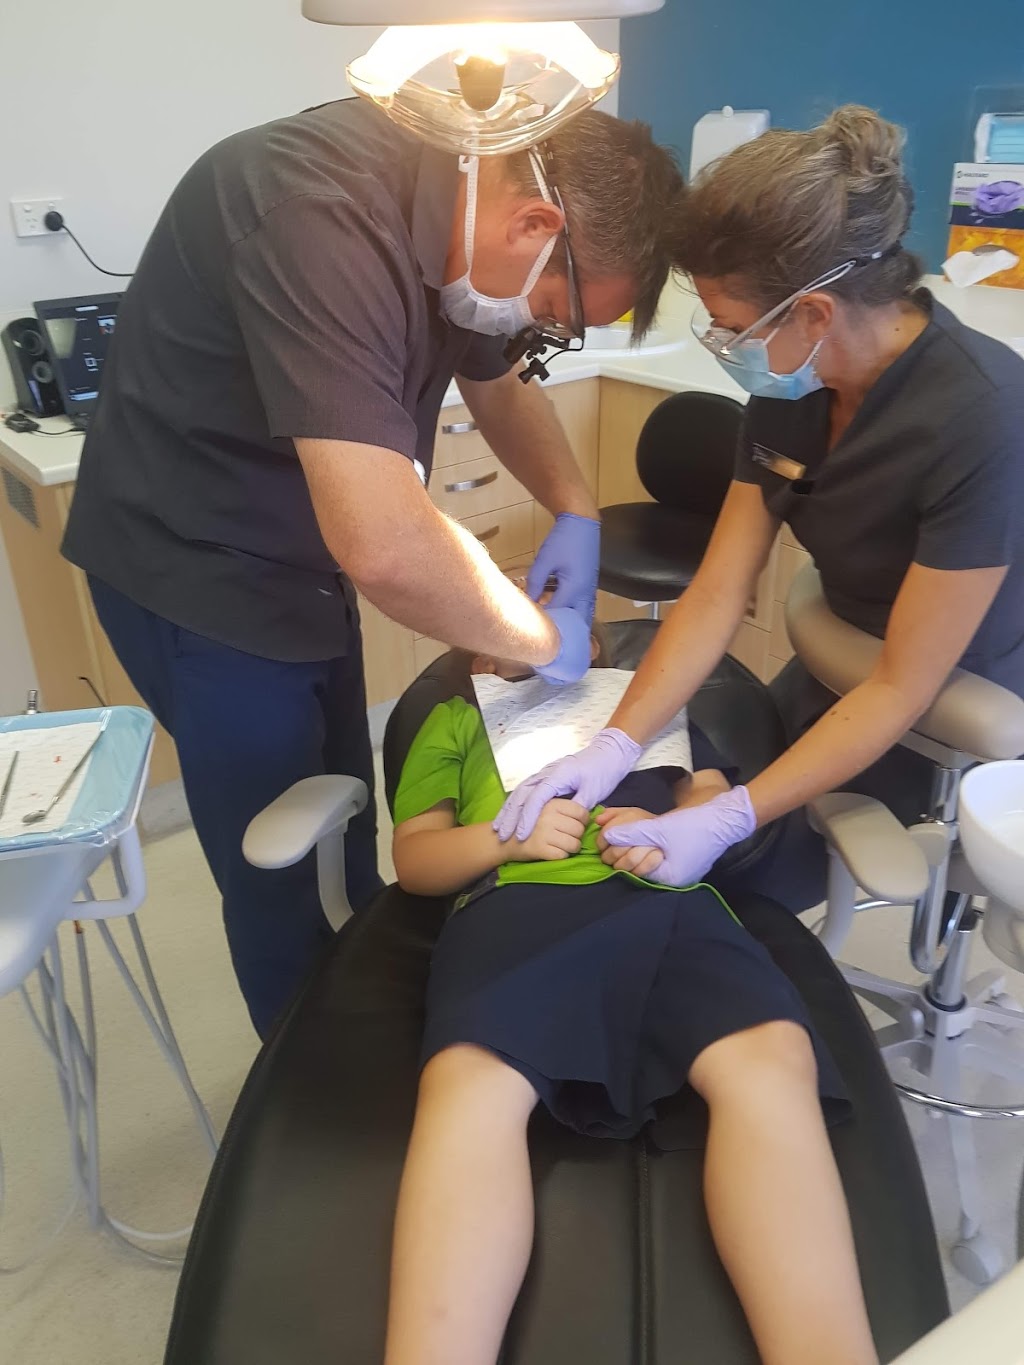 Dr Timothy OConnell-Maritz (The Family Dental Caboolture) | dentist | Lakes Centre, Suite 28/8-22 King St, Caboolture QLD 4510, Australia | 0754282277 OR +61 7 5428 2277